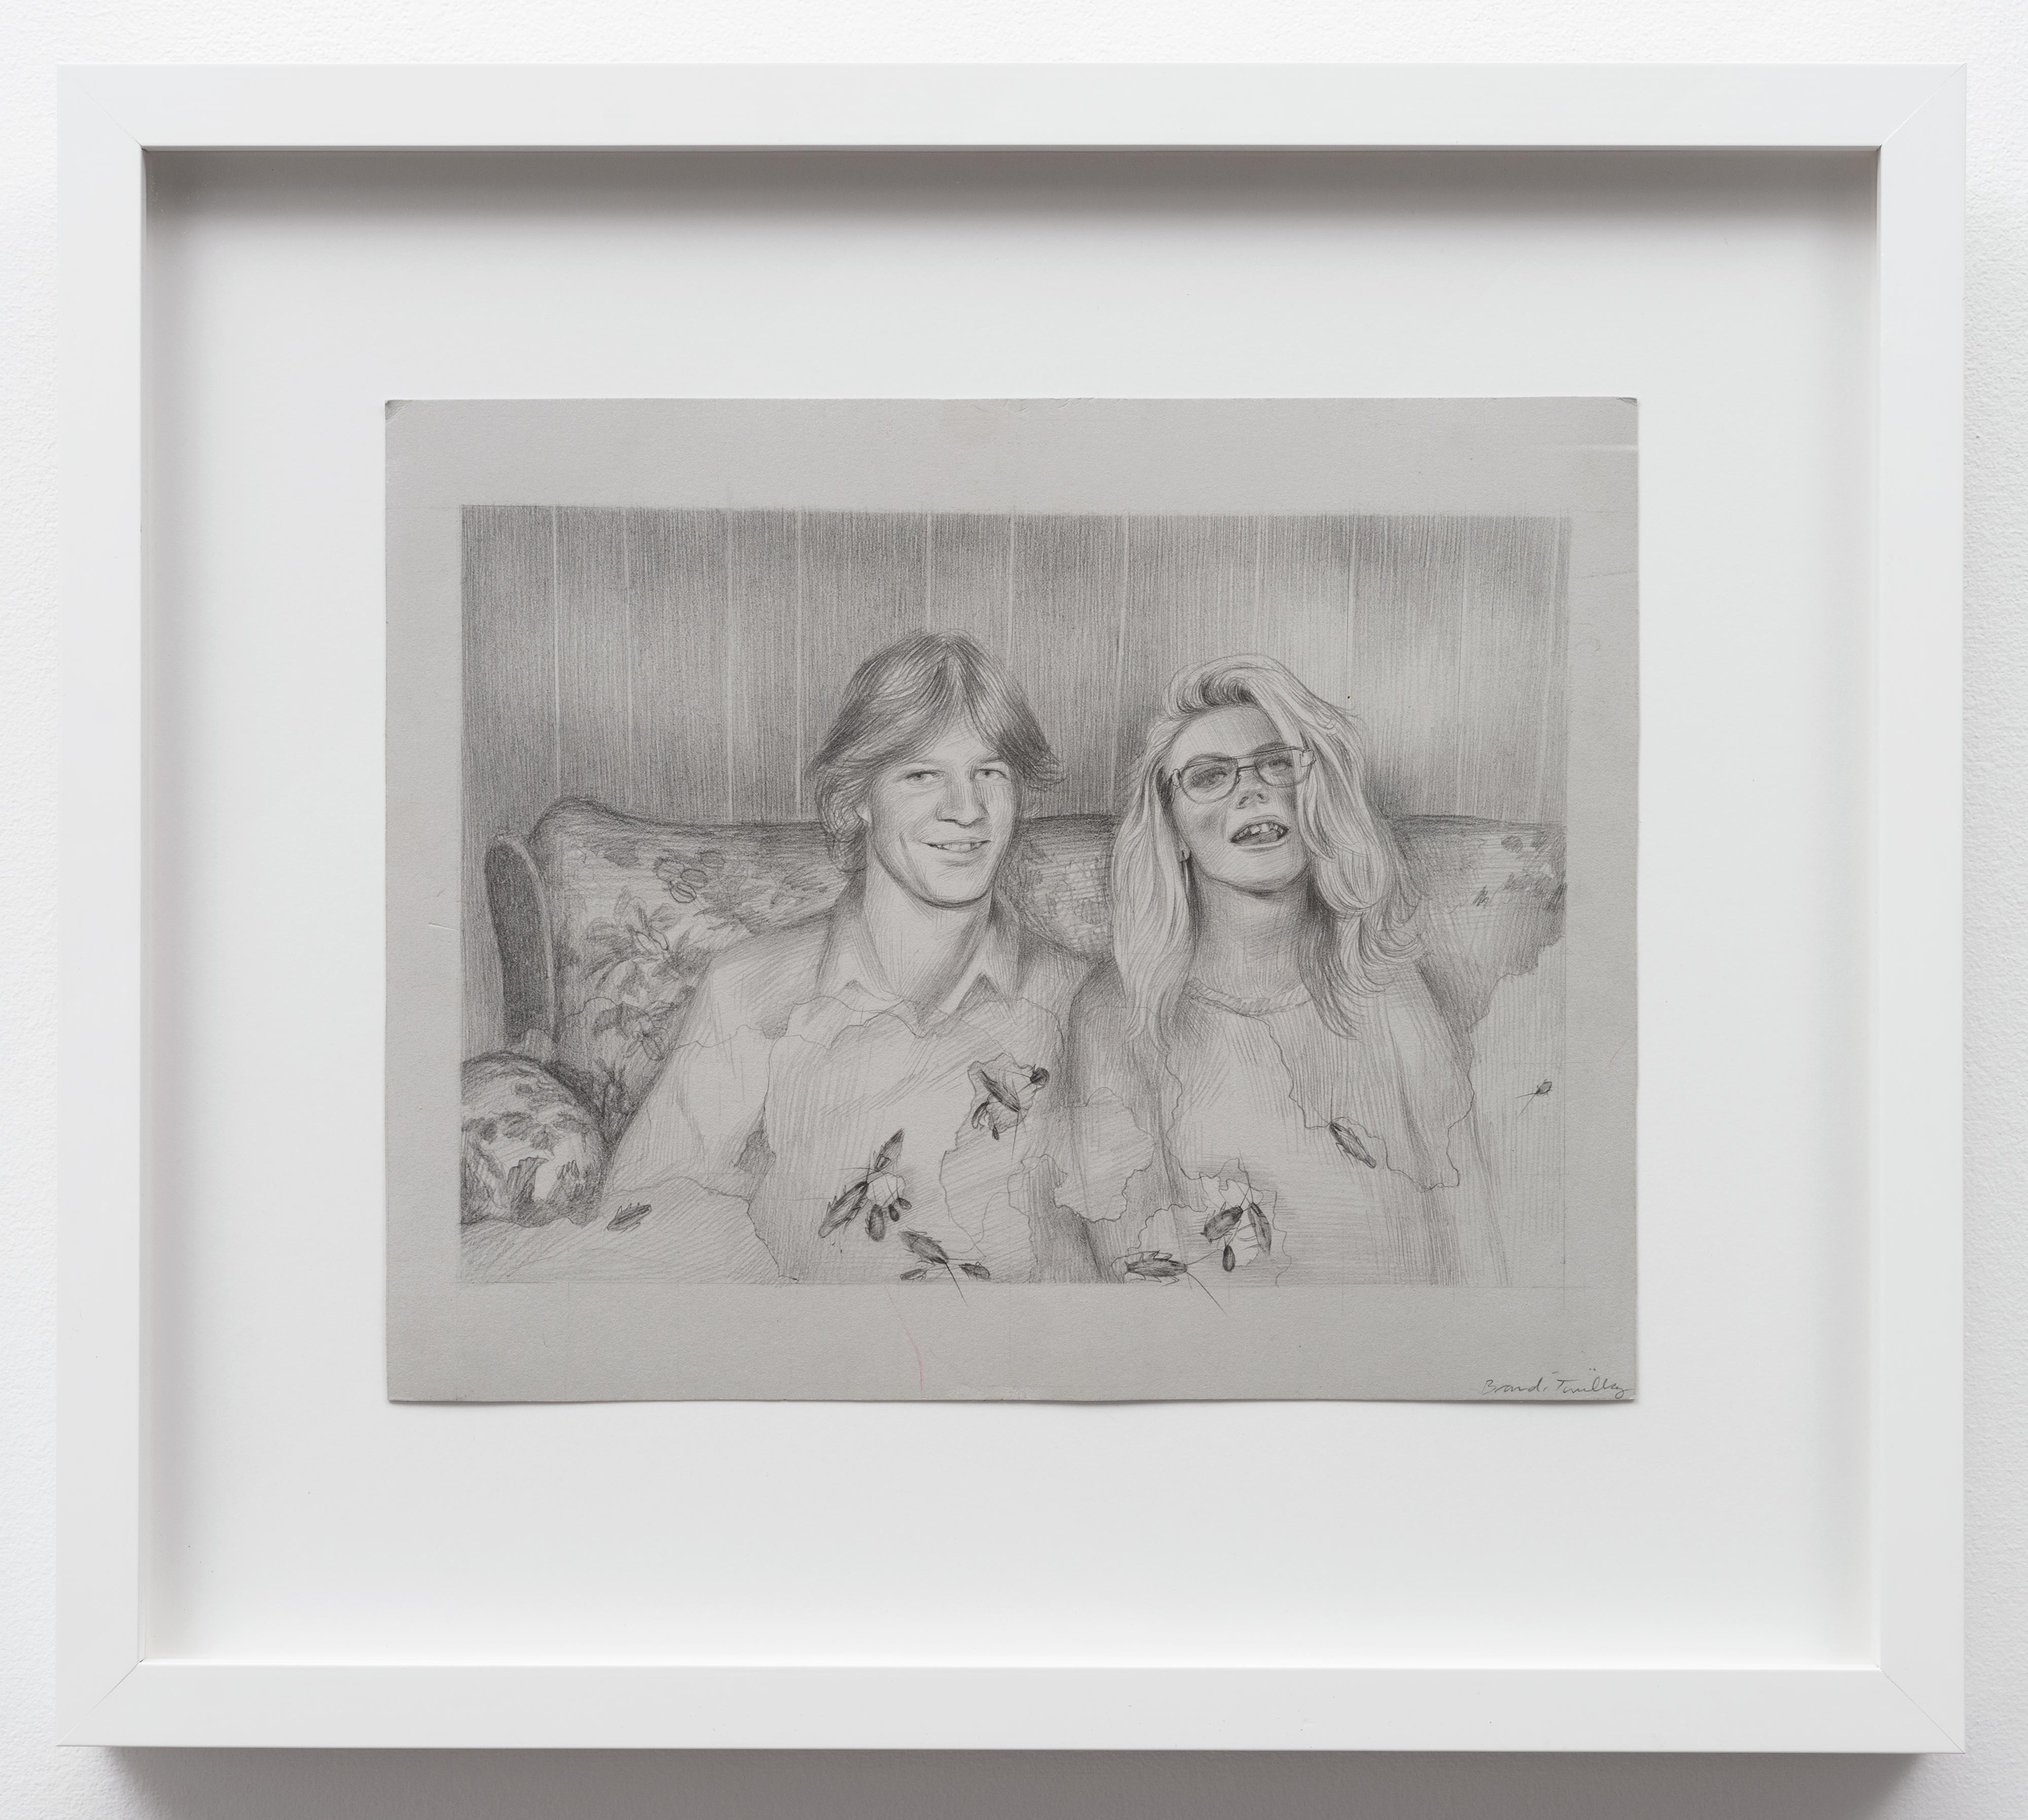 Brandi Twilley<br>On the Couch with Roaches<br>2015<br>Graphite on gray paper<br>9 x 11.5 in (23 x 29 cm)